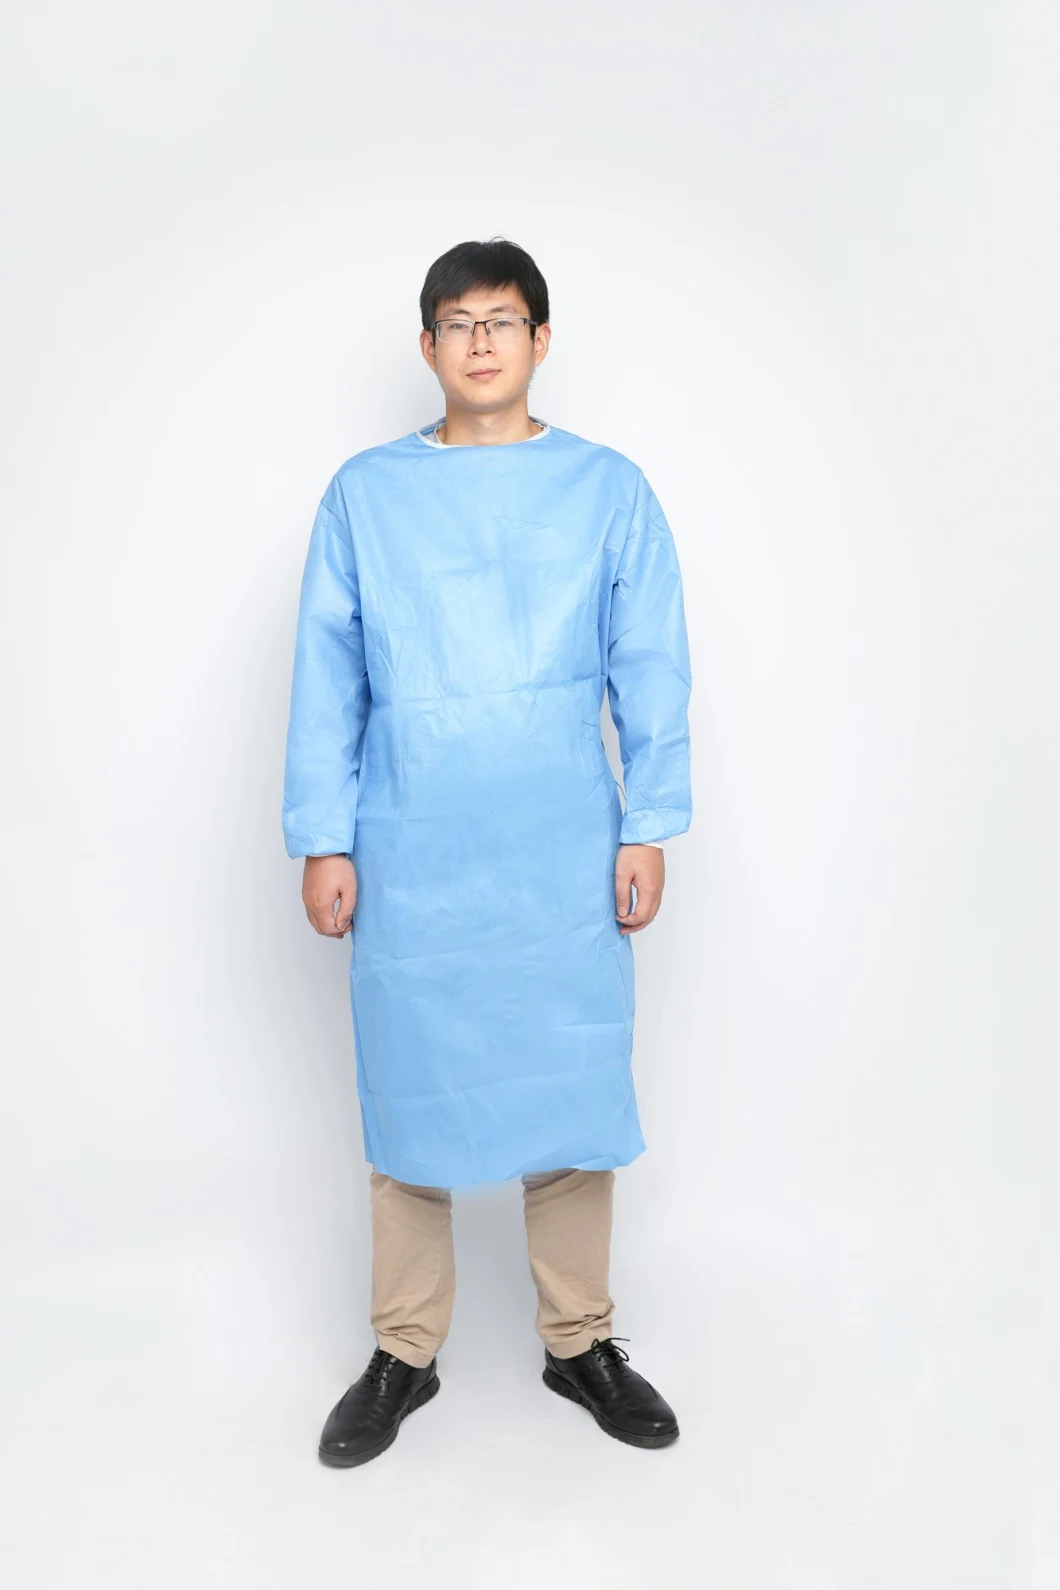 Protection Coverall PPE Workwear Siamese Chemical Protection Workwear Siamese Protection Operation Safety Waterproof Antivirus Safety